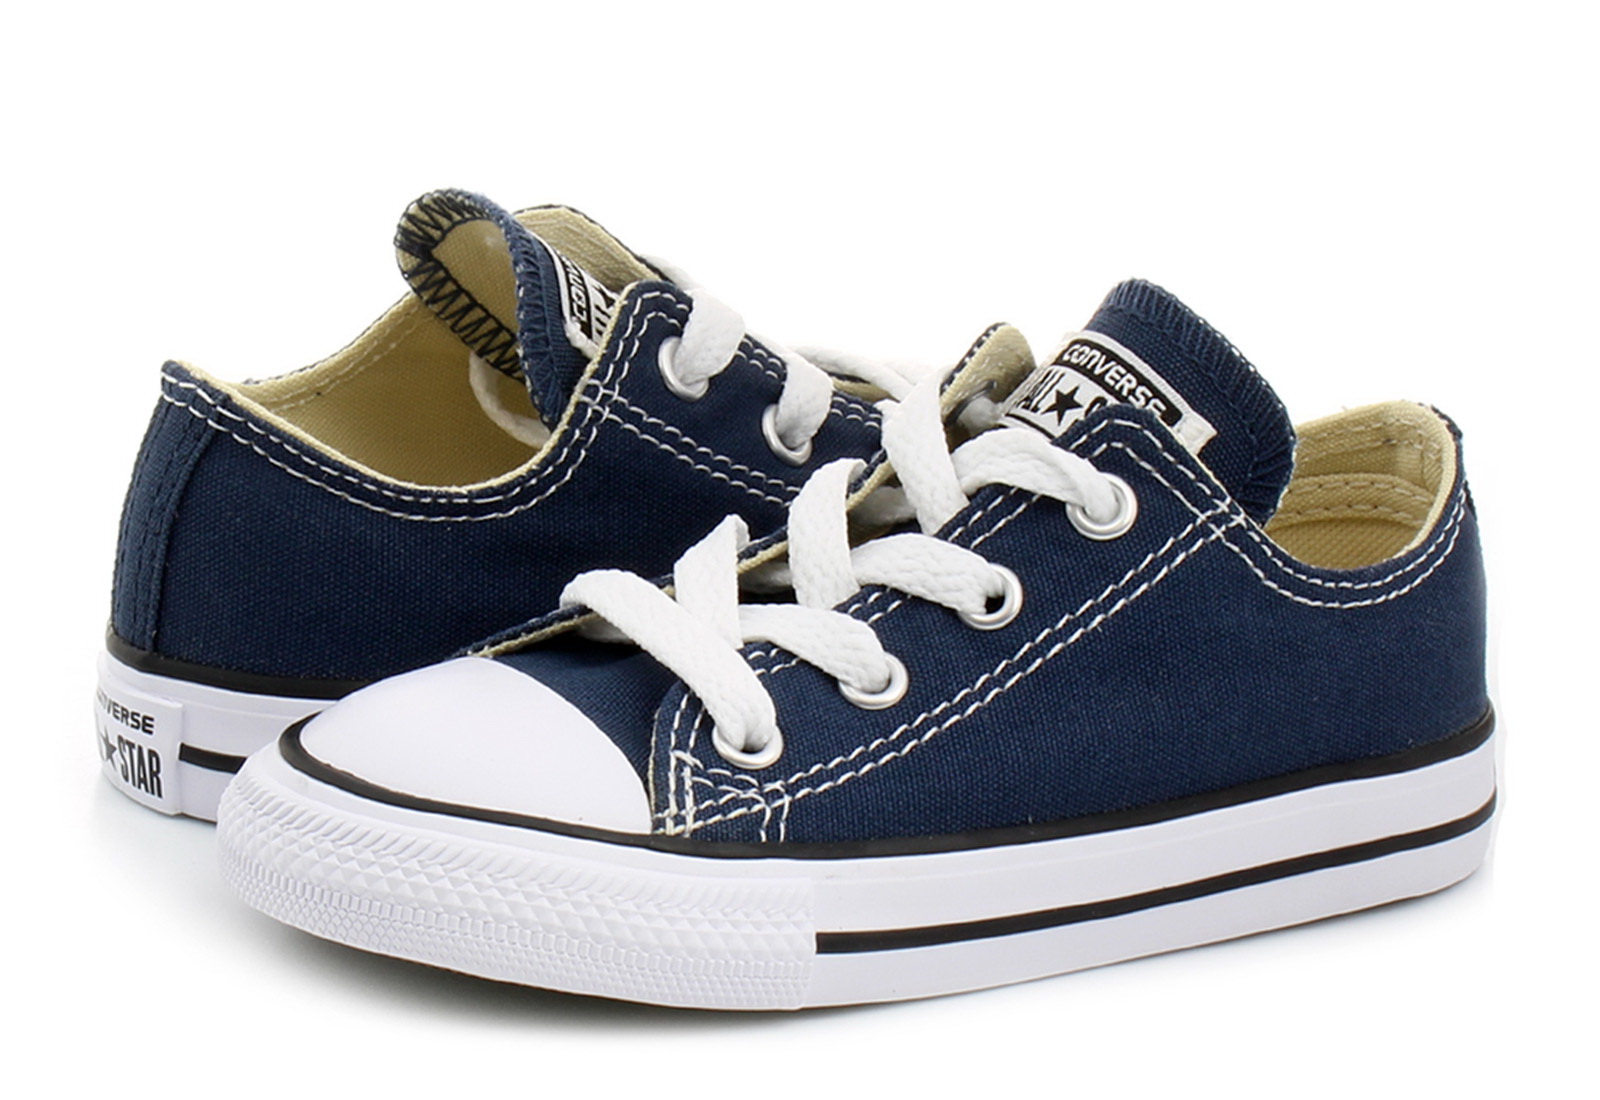 Converse Tenisi - Ct As Kids Core Ox - 7J237C - Office Shoes Romania